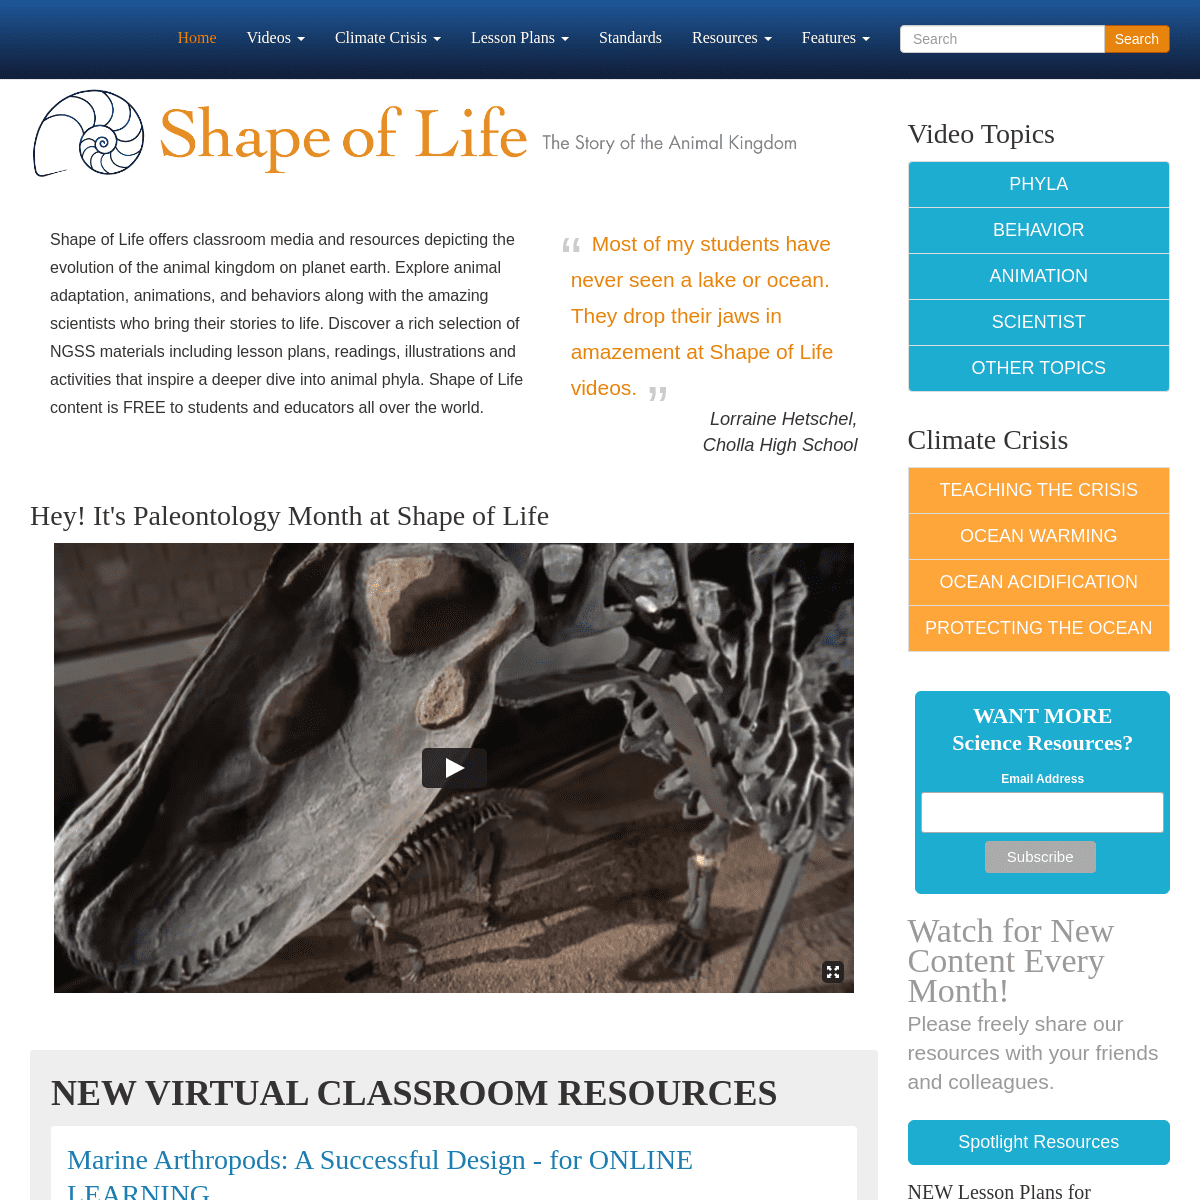 A complete backup of https://shapeoflife.org